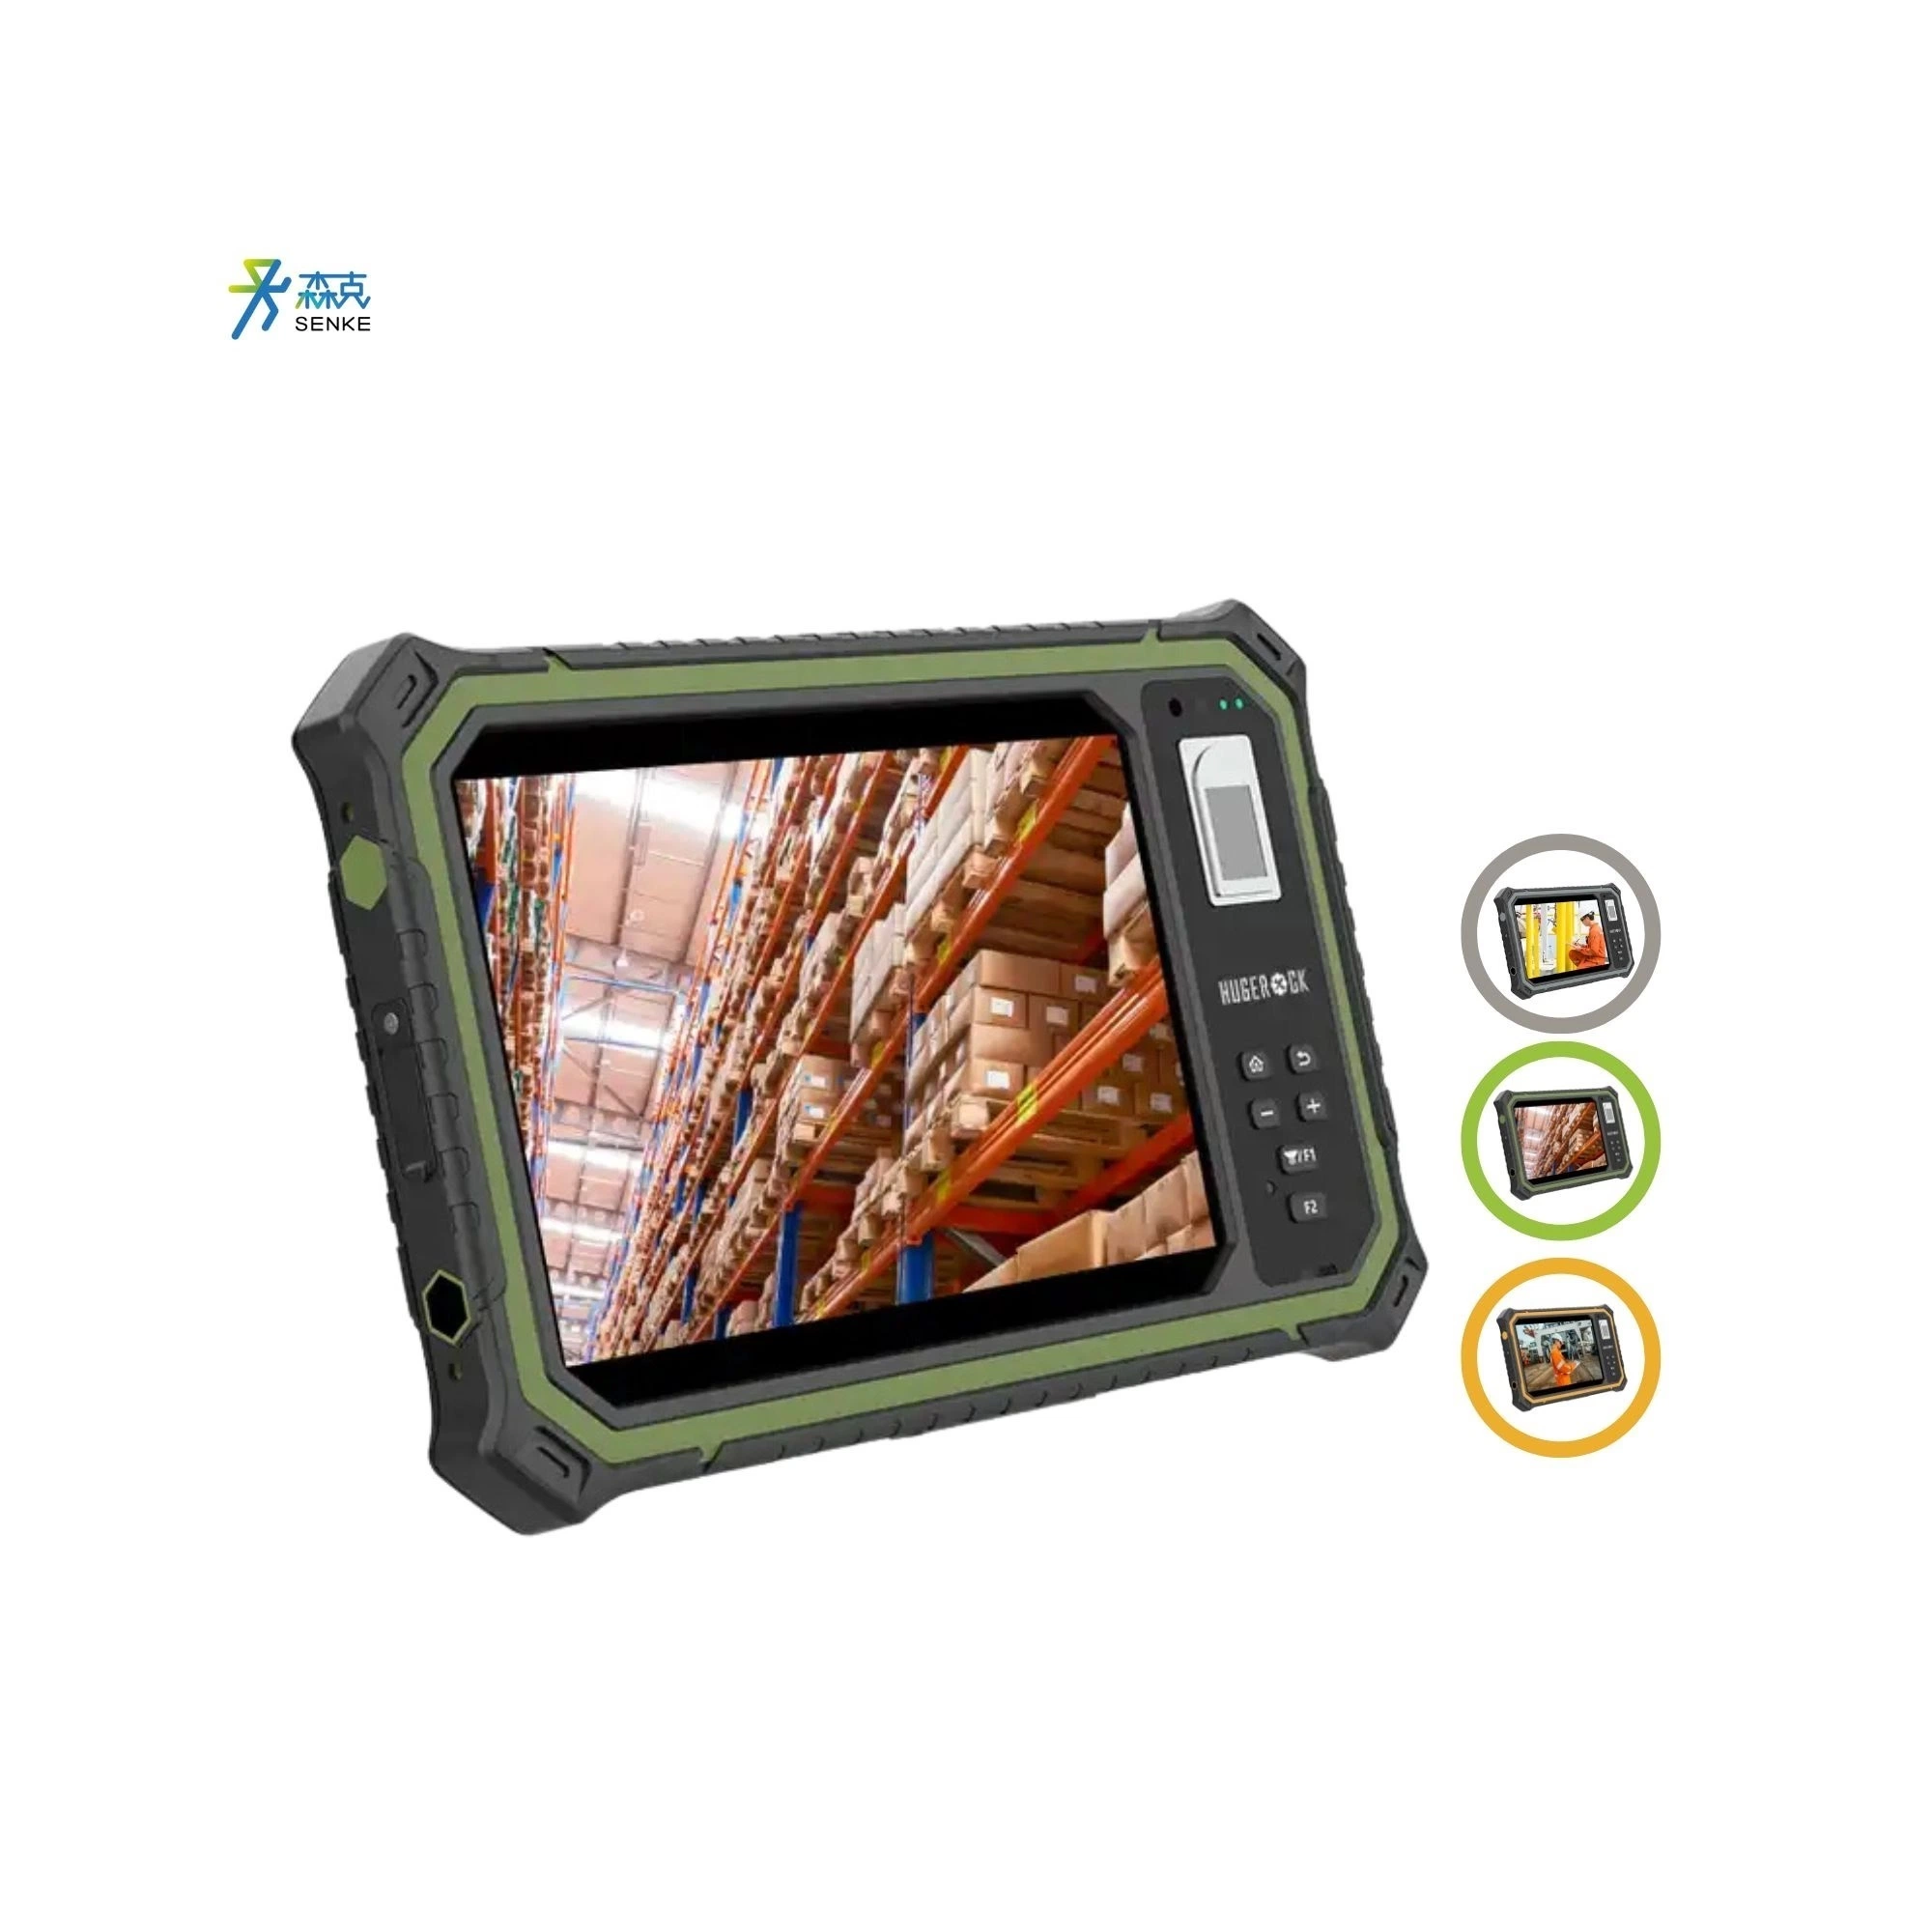 Senke Customized 7 Inch Android 1000 Nits Panel Industrial Touch Screen Rugged Tablete PC 7'' Tablet PC Industrial Aluminum Rugged